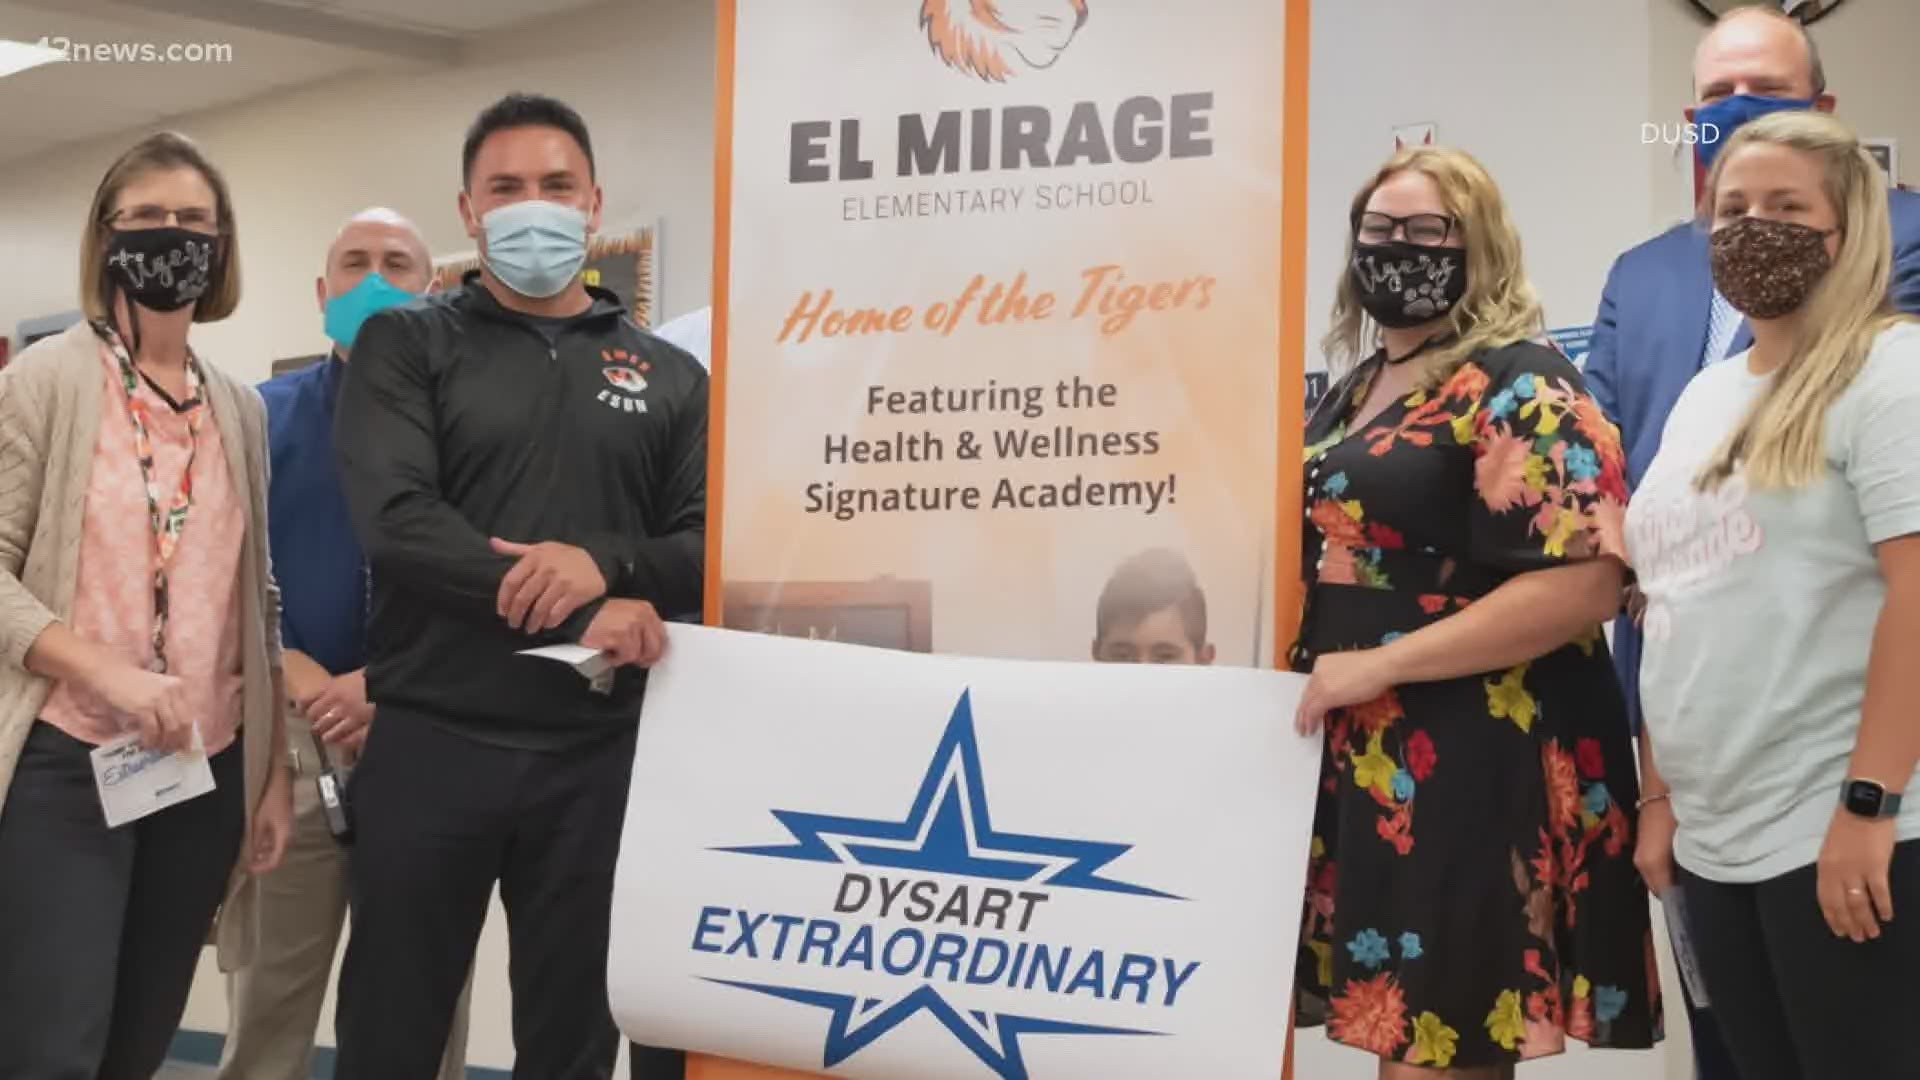 The mom of a first-grade student at El Mirage Elementary is alive thanks to the quick thinking of the school's staff when she suffered a medical emergency.